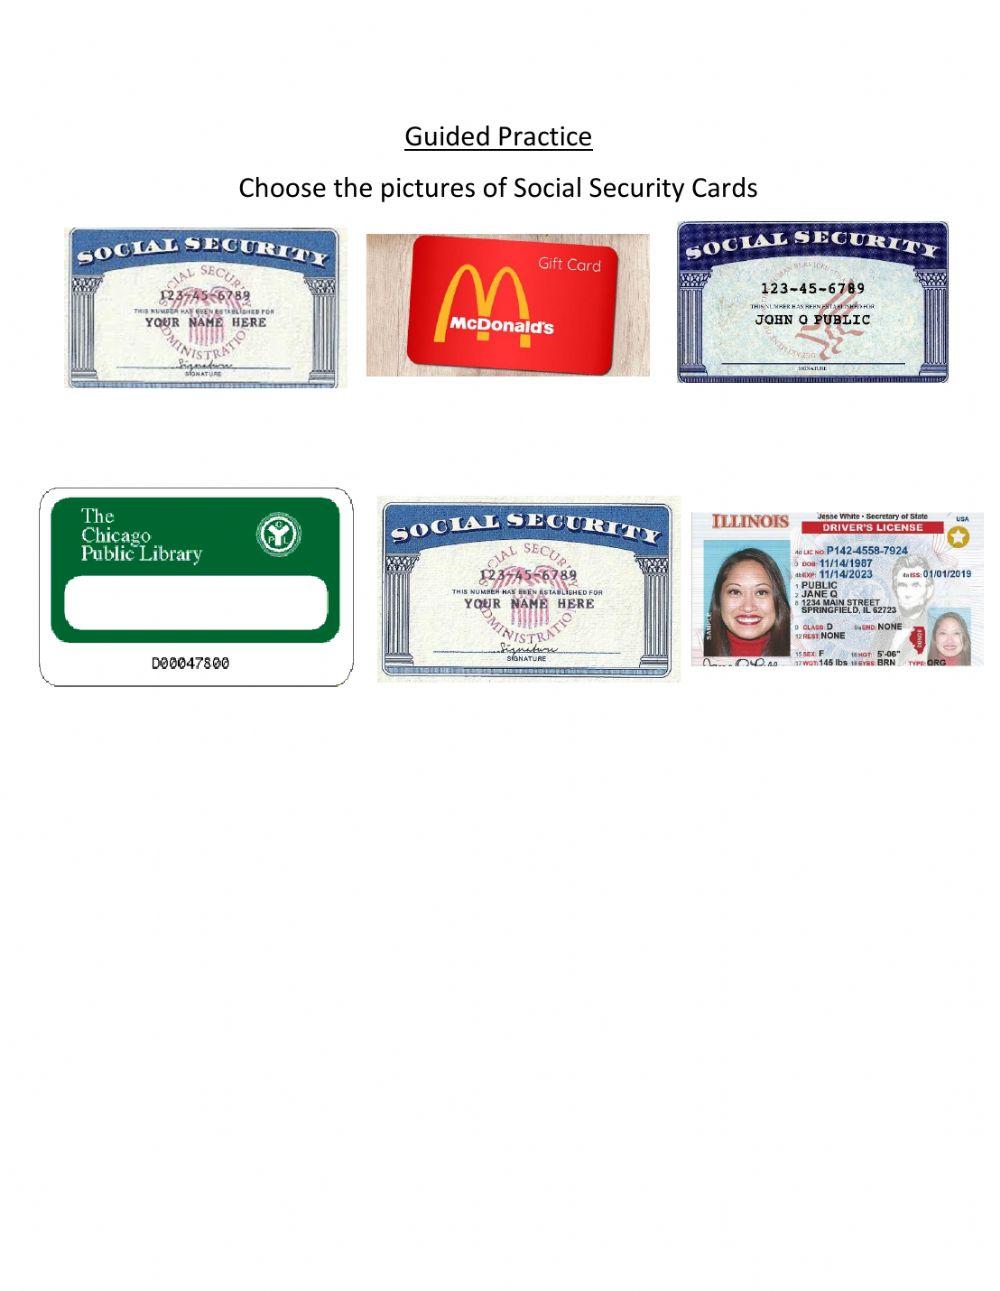 Guided Practice: Social Security Cards